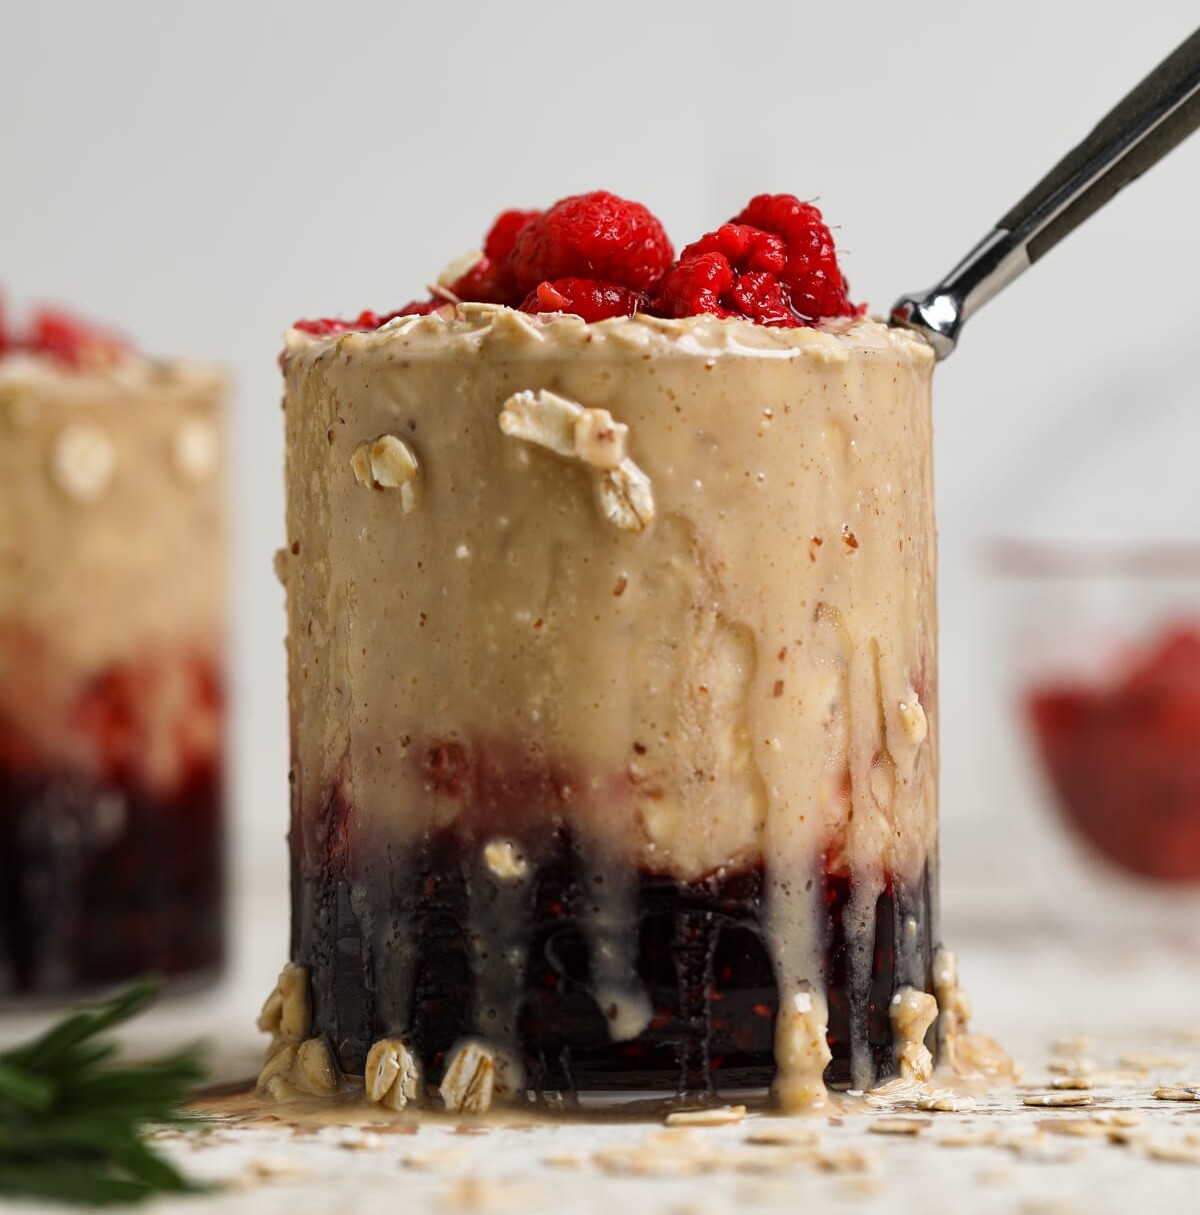 Glass of Protein Peanut Butter and Jelly Overnight Oats